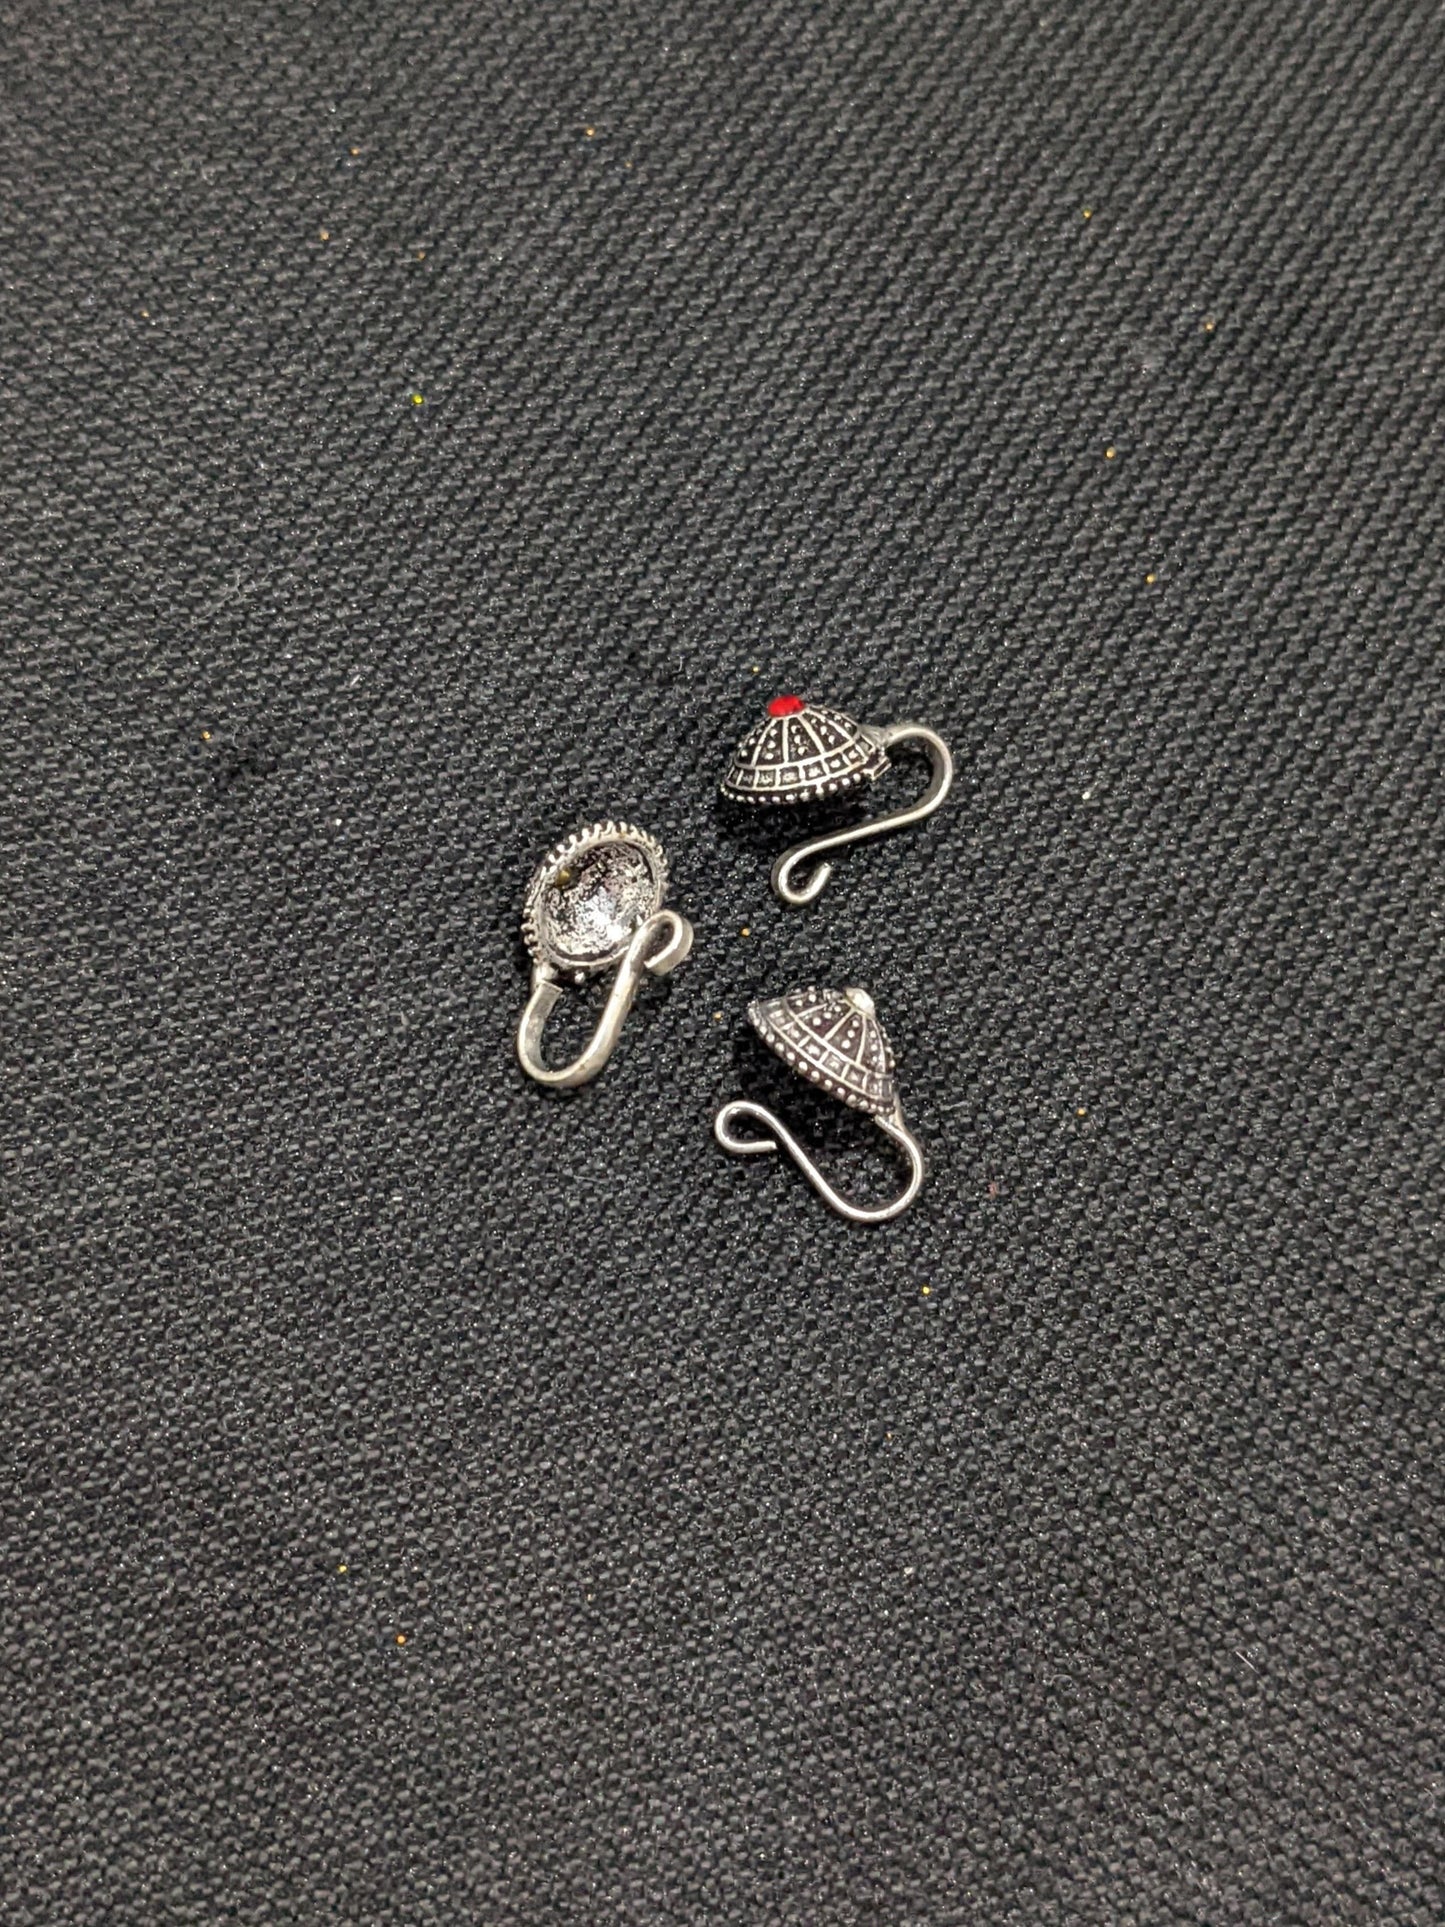 Oxidized Silver Small clip on nose pin - Different designs